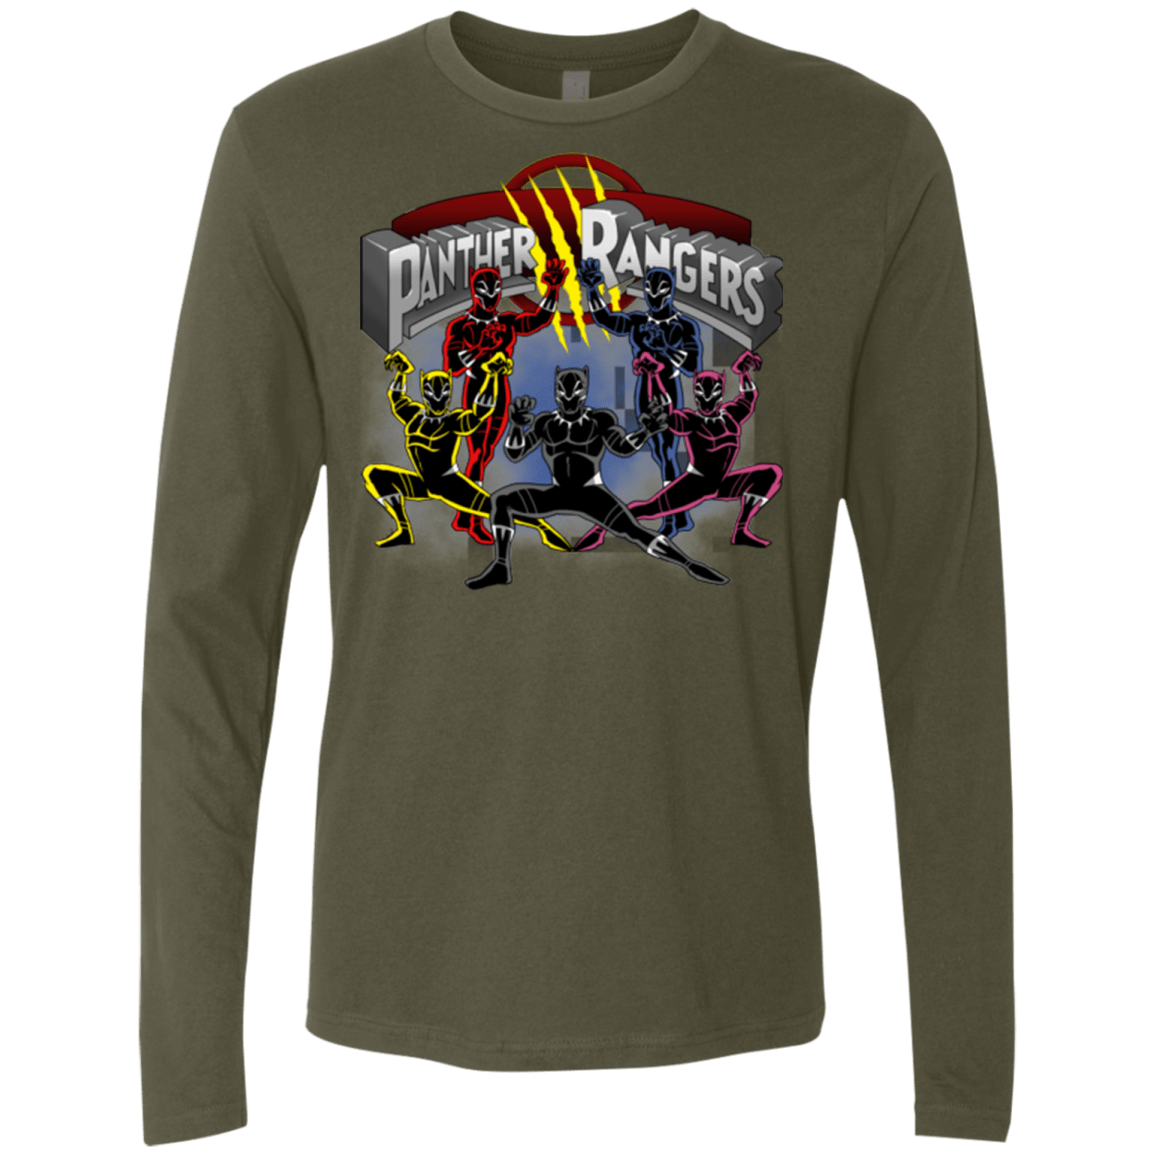 T-Shirts Military Green / Small Panther Rangers Men's Premium Long Sleeve